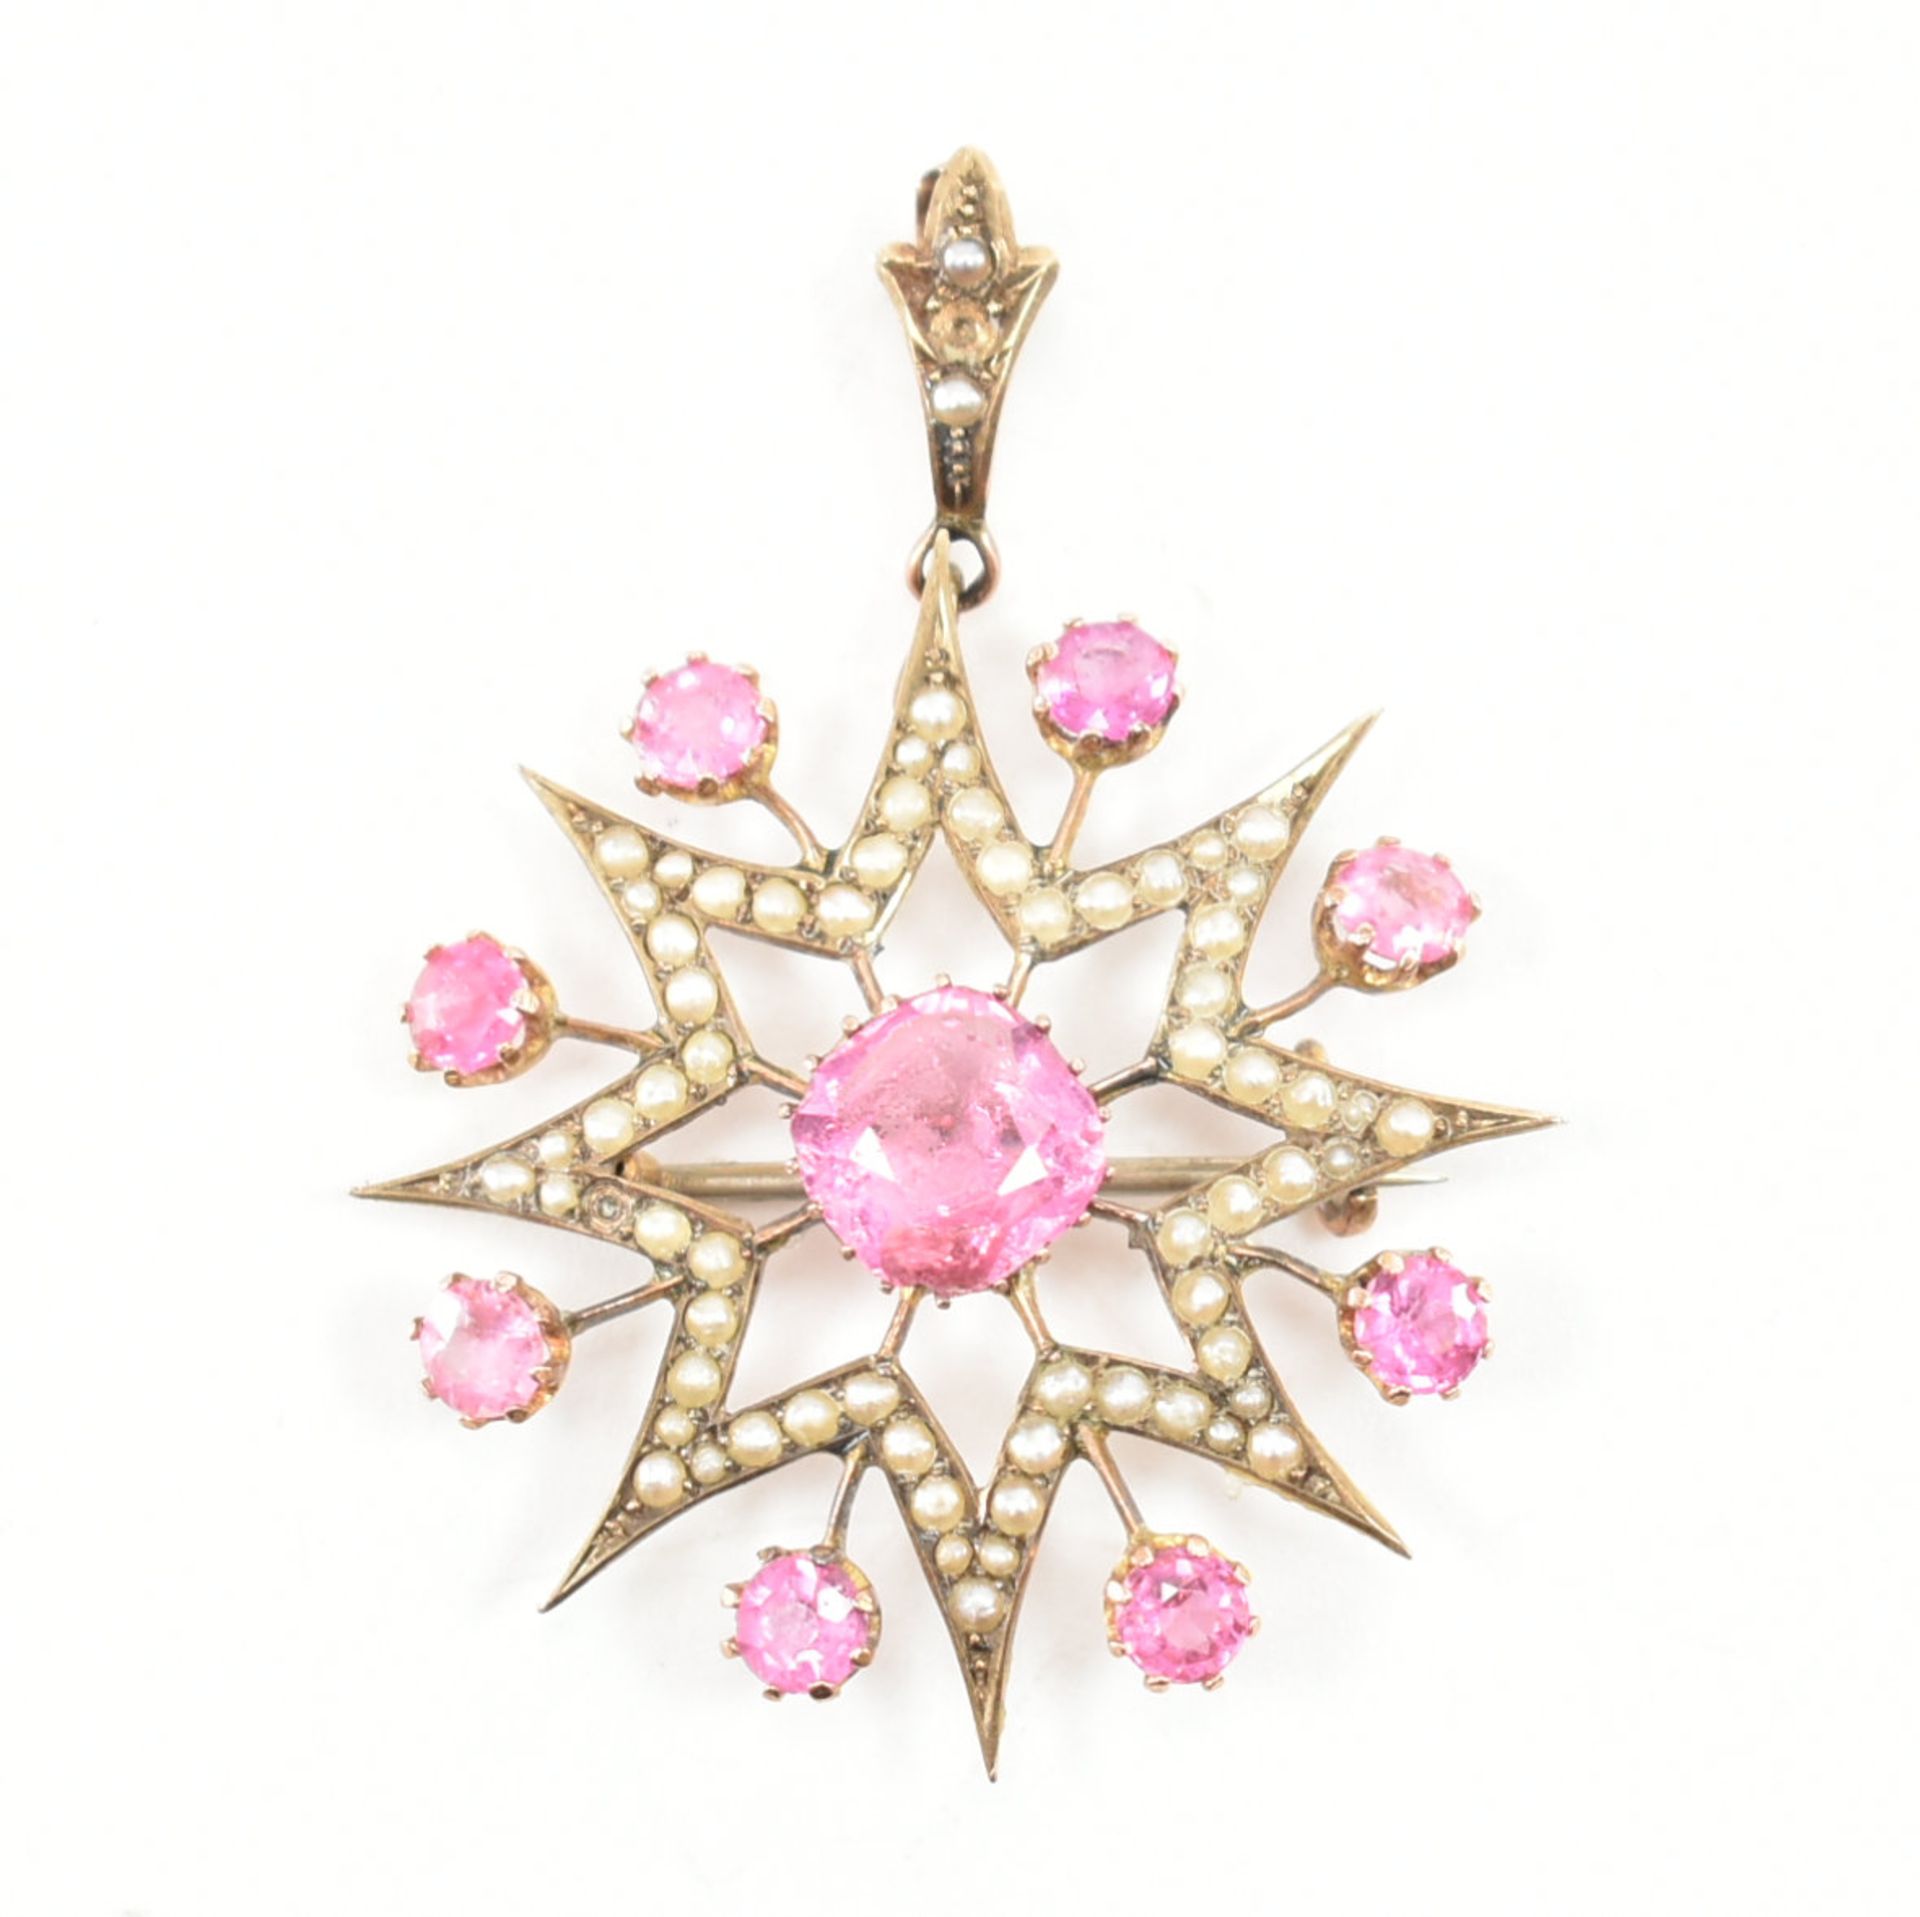 VICTORIAN 9CT GOLD SEED PEARL & PINK STONE PENDANT BROOCH